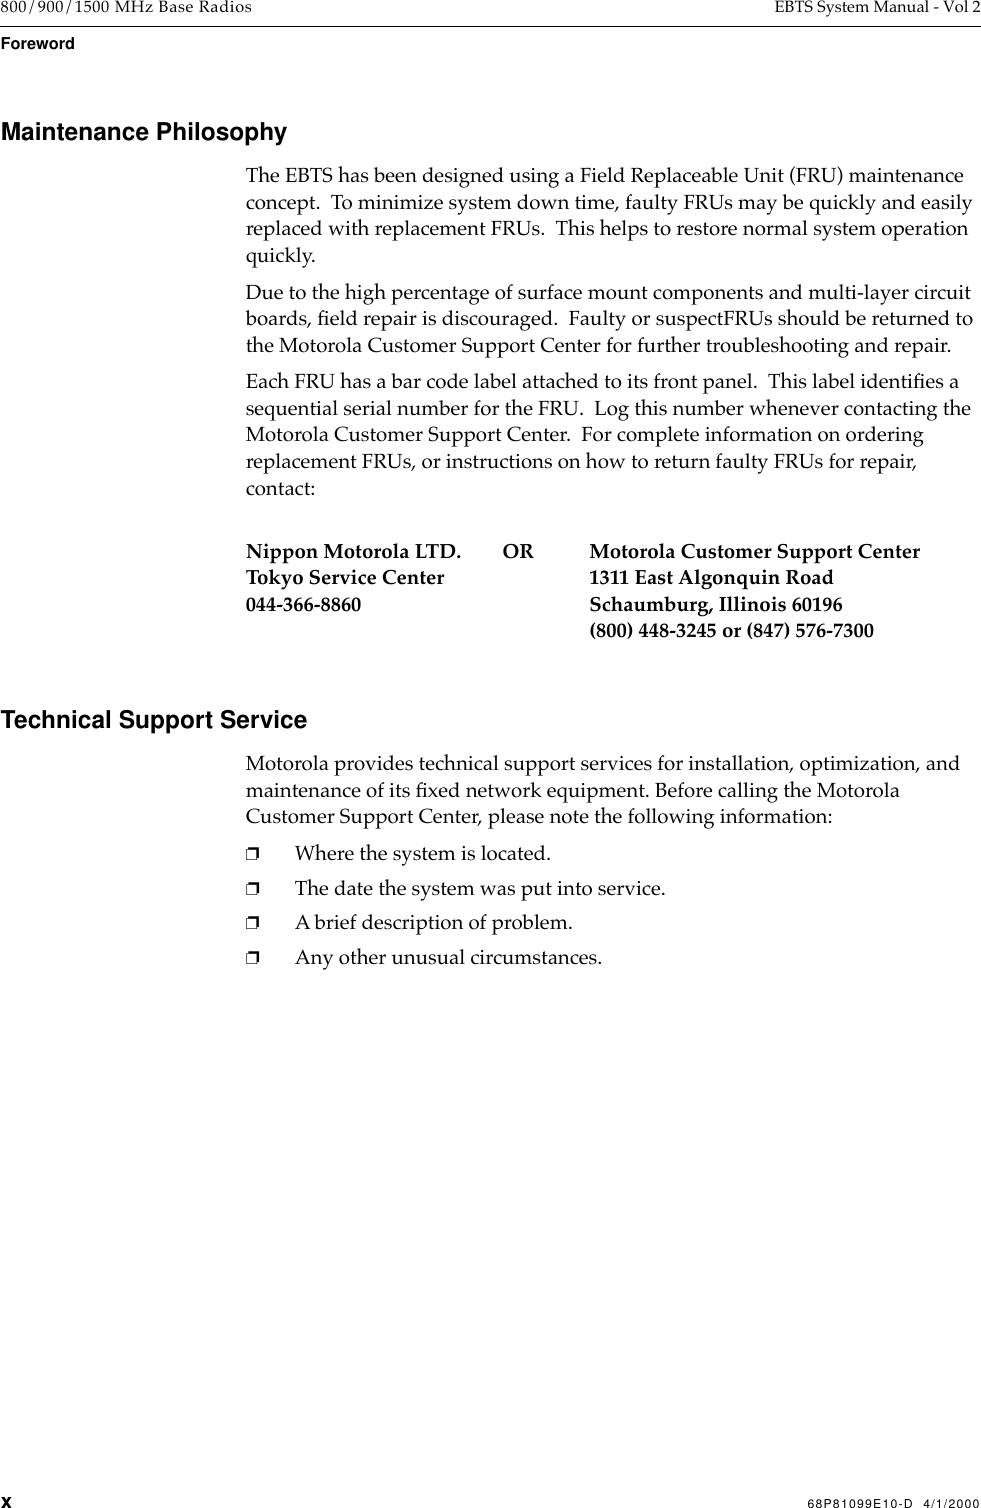  x 68P81099E10-D  4/1/2000 800/900/1500 MHz Base Radios EBTS System Manual - Vol 2 Foreword Maintenance Philosophy The EBTS has been designed using a Field Replaceable Unit (FRU) maintenance concept.  To minimize system down time, faulty FRUs may be quickly and easily replaced with replacement FRUs.  This helps to restore normal system operation quickly.Due to the high percentage of surface mount components and multi-layer circuit boards, Þeld repair is discouraged.  Faulty or suspectFRUs should be returned to the Motorola Customer Support Center for further troubleshooting and repair.Each FRU has a bar code label attached to its front panel.  This label identiÞes a sequential serial number for the FRU.  Log this number whenever contacting the Motorola Customer Support Center.  For complete information on ordering replacement FRUs, or instructions on how to return faulty FRUs for repair, contact: Nippon Motorola LTD.        OR Motorola Customer Support CenterTokyo Service Center 1311 East Algonquin Road044-366-8860 Schaumburg, Illinois 60196(800) 448-3245 or (847) 576-7300 Technical Support Service Motorola provides technical support services for installation, optimization, and maintenance of its Þxed network equipment. Before calling the Motorola Customer Support Center, please note the following information: ❐ Where the system is located. ❐ The date the system was put into service. ❐ A brief description of problem.  ❐ Any other unusual circumstances.